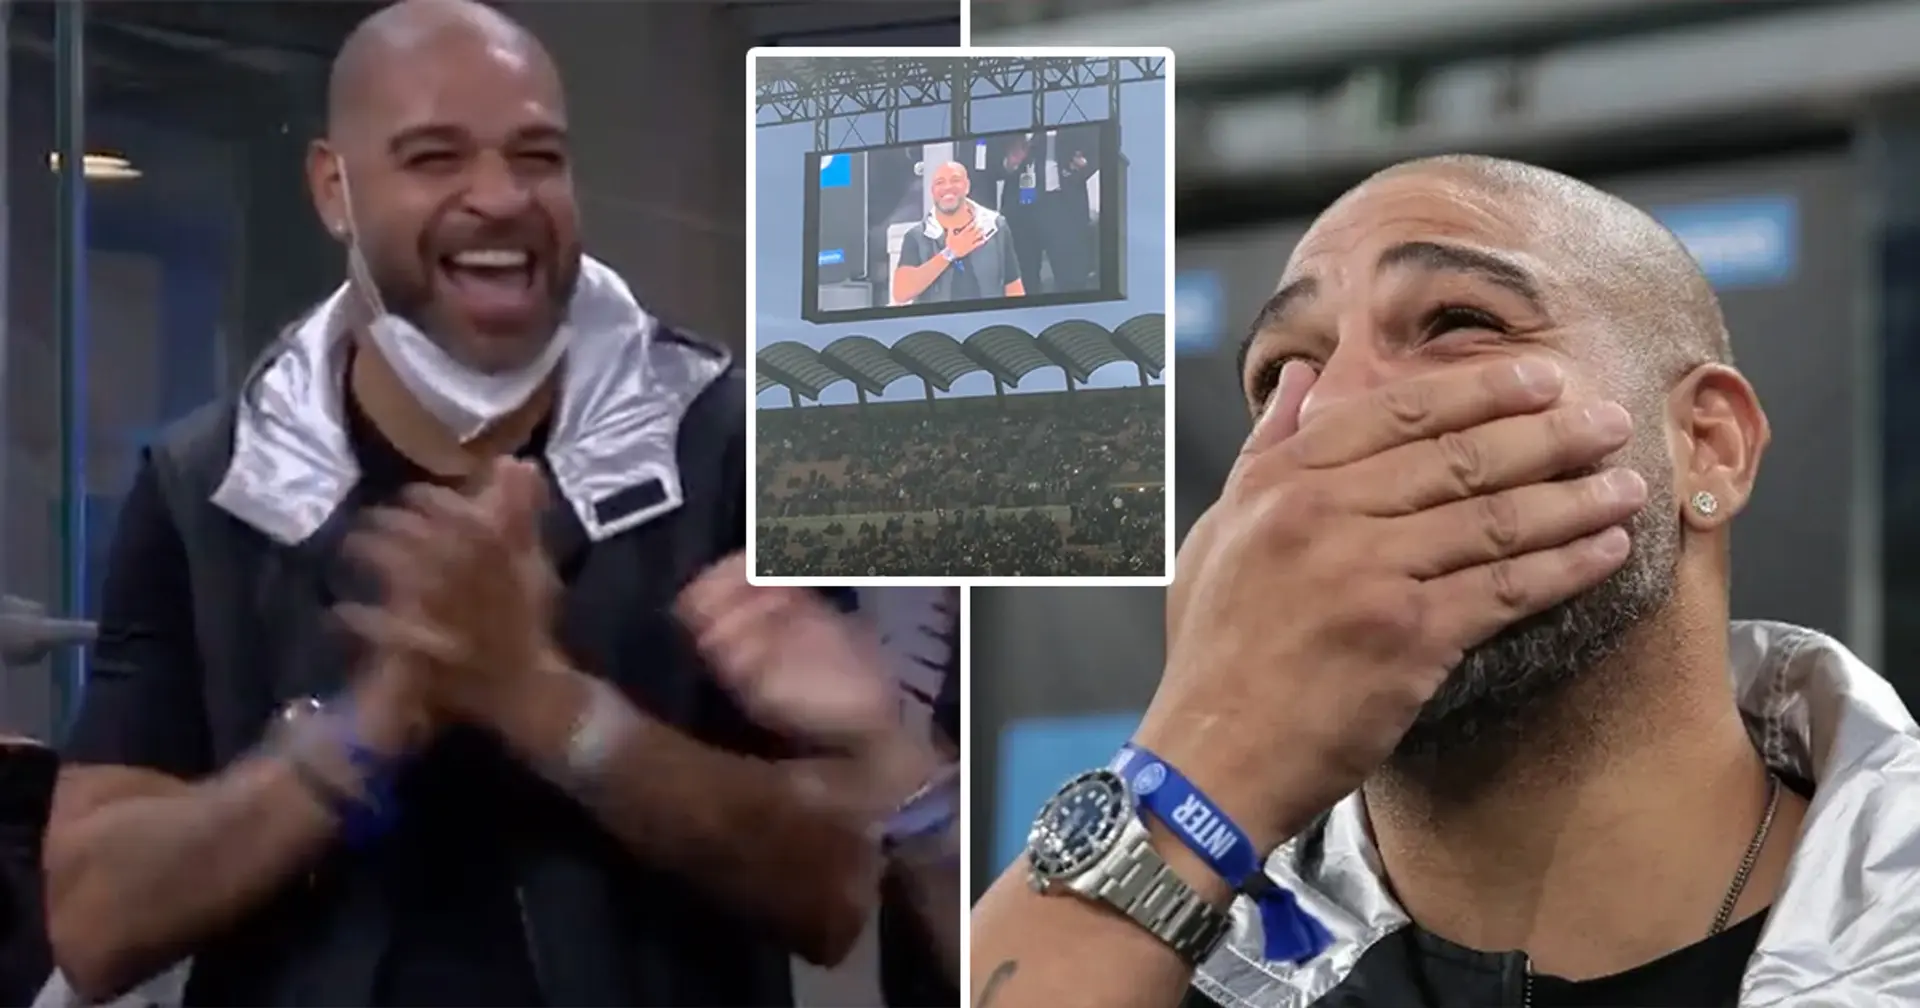 Adriano breaks down in tears after returning at San Siro for Inter vs Milan game